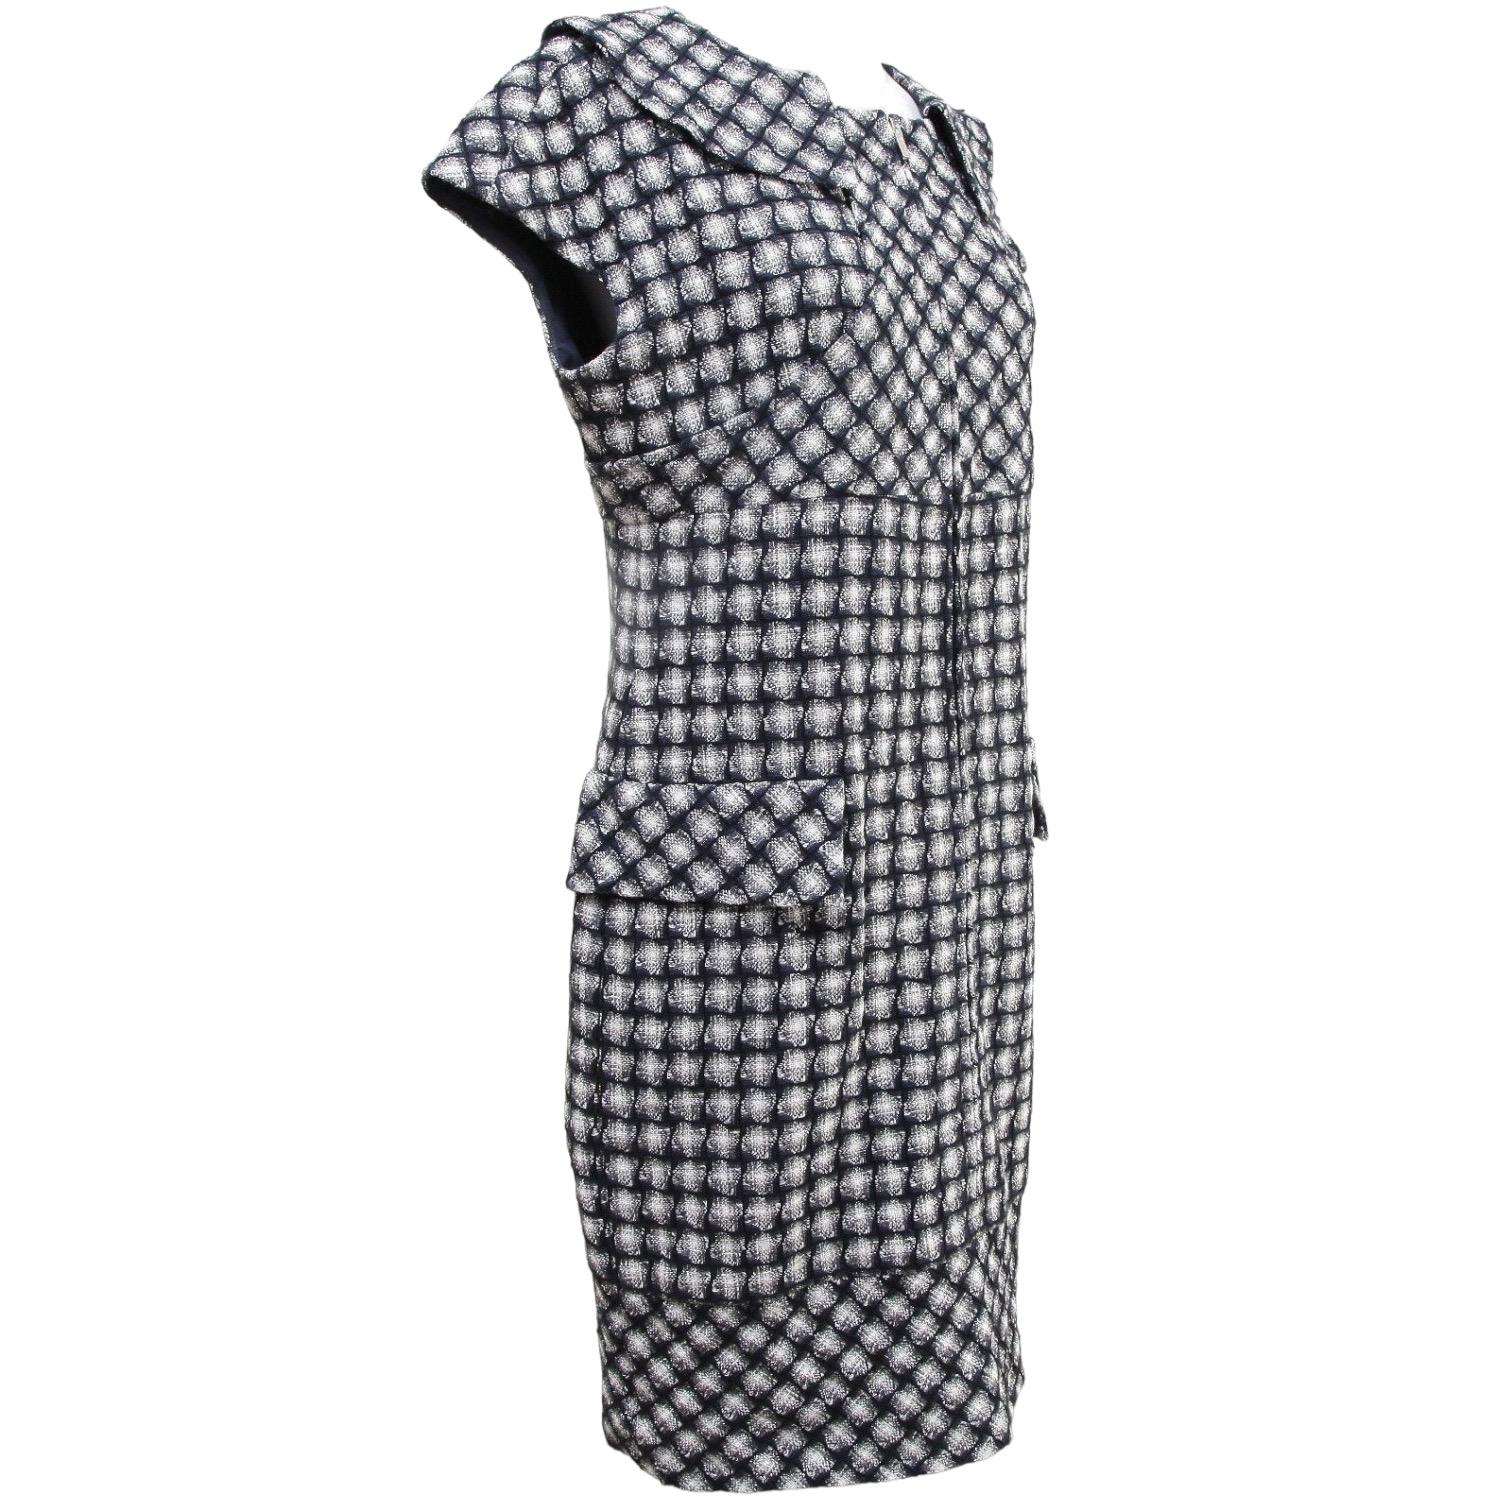 GUARANTEED AUTHENTIC TERRIFIC CHANEL TWEED PRINT SHIFT DRESS

 

Design:
- Versatile cap sleeve tweed knit dress in rich shades navy, black, white and grey.
- Beautiful print throughout.
- Peter pan style collar with full front zipper closure
- Dual